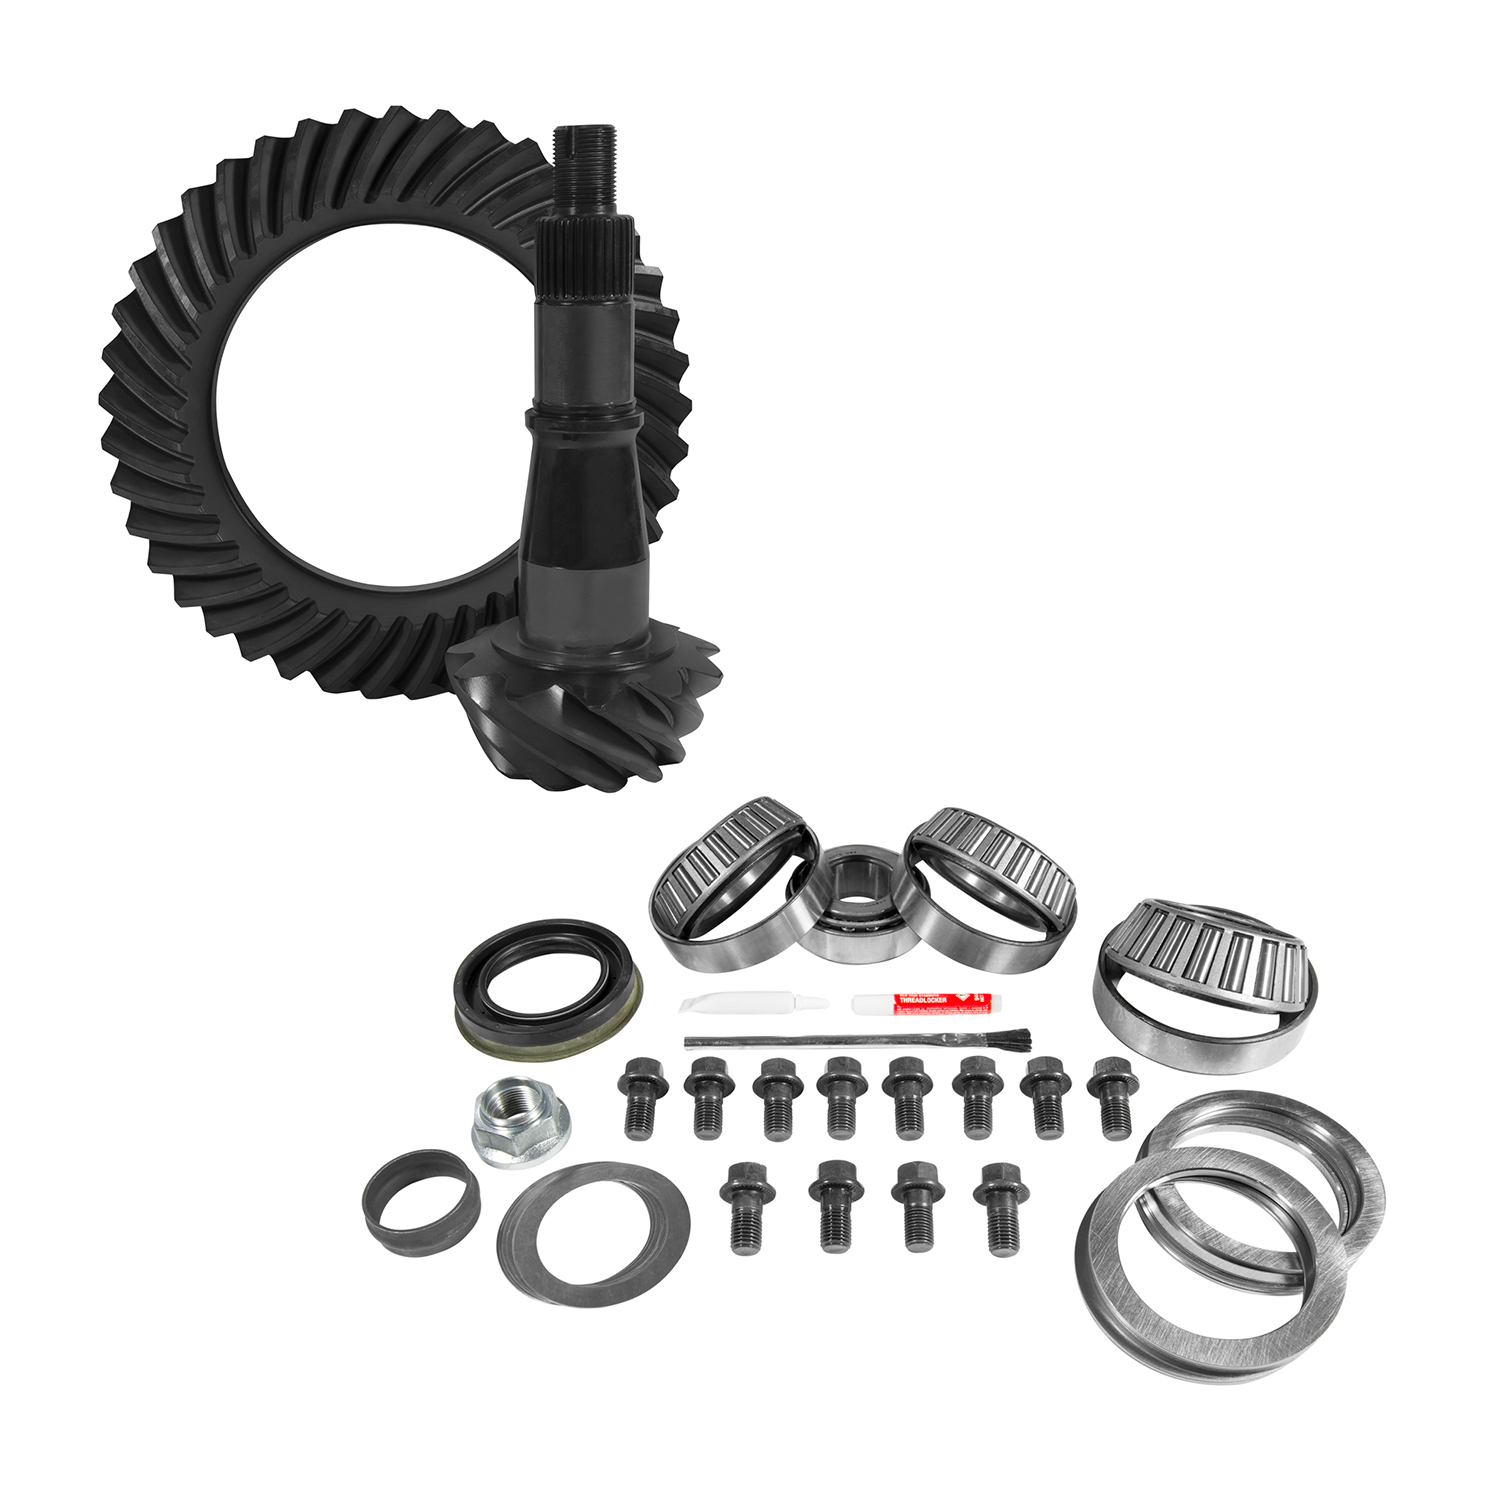 USA Standard 10705 9.5 in. GM 4.11 Rear Ring & Pinion Install Kit, Axle Bearings & Seals